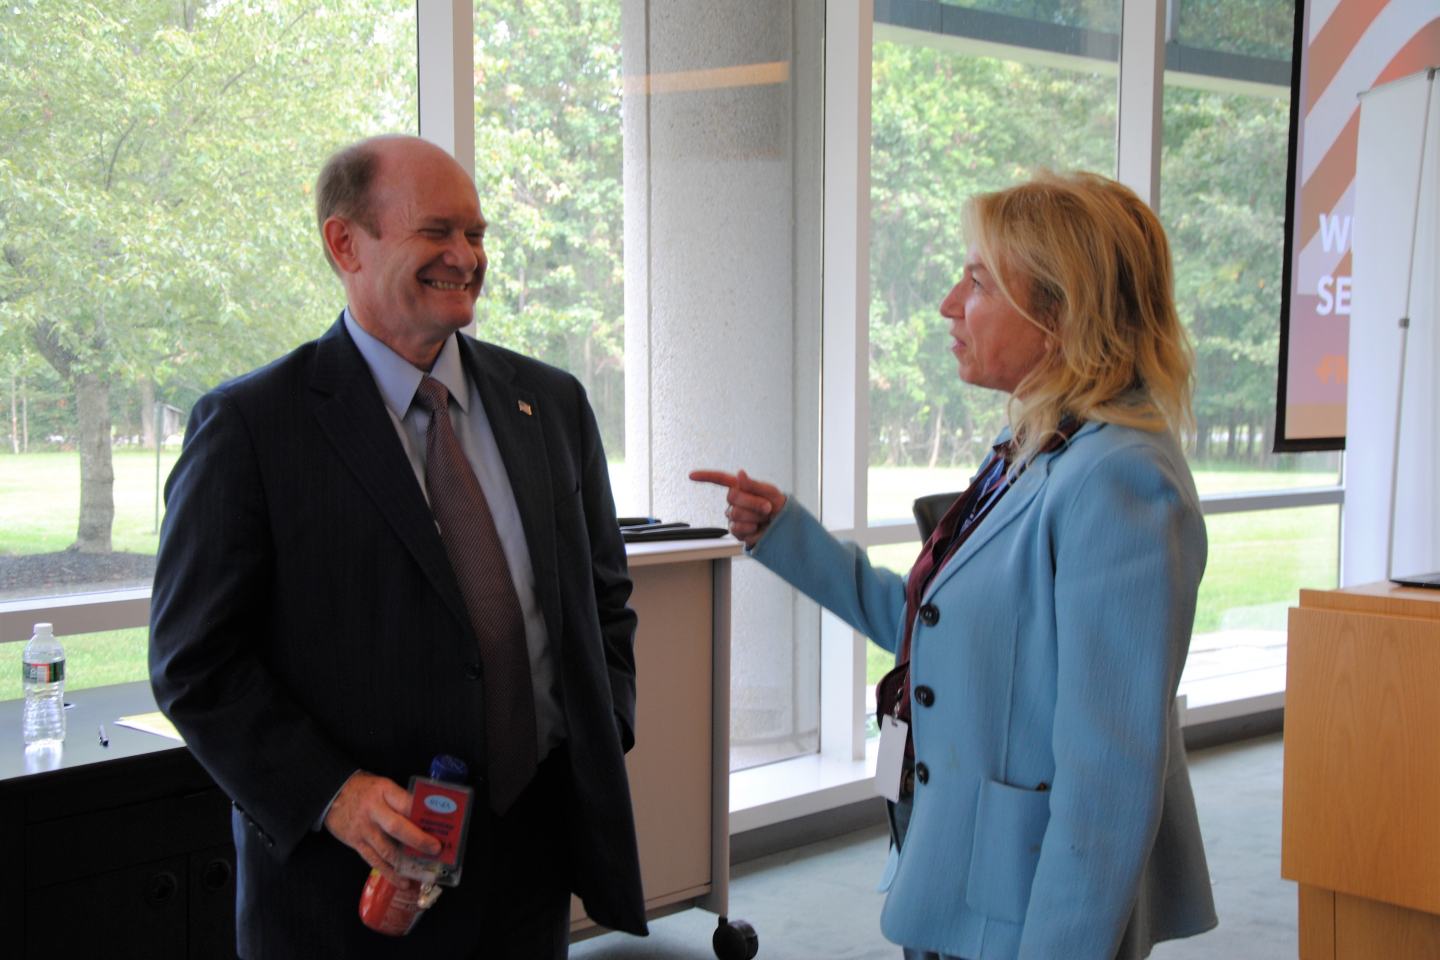 Chris Coons with Kathy Shelton, VP and Chief Technology Officer